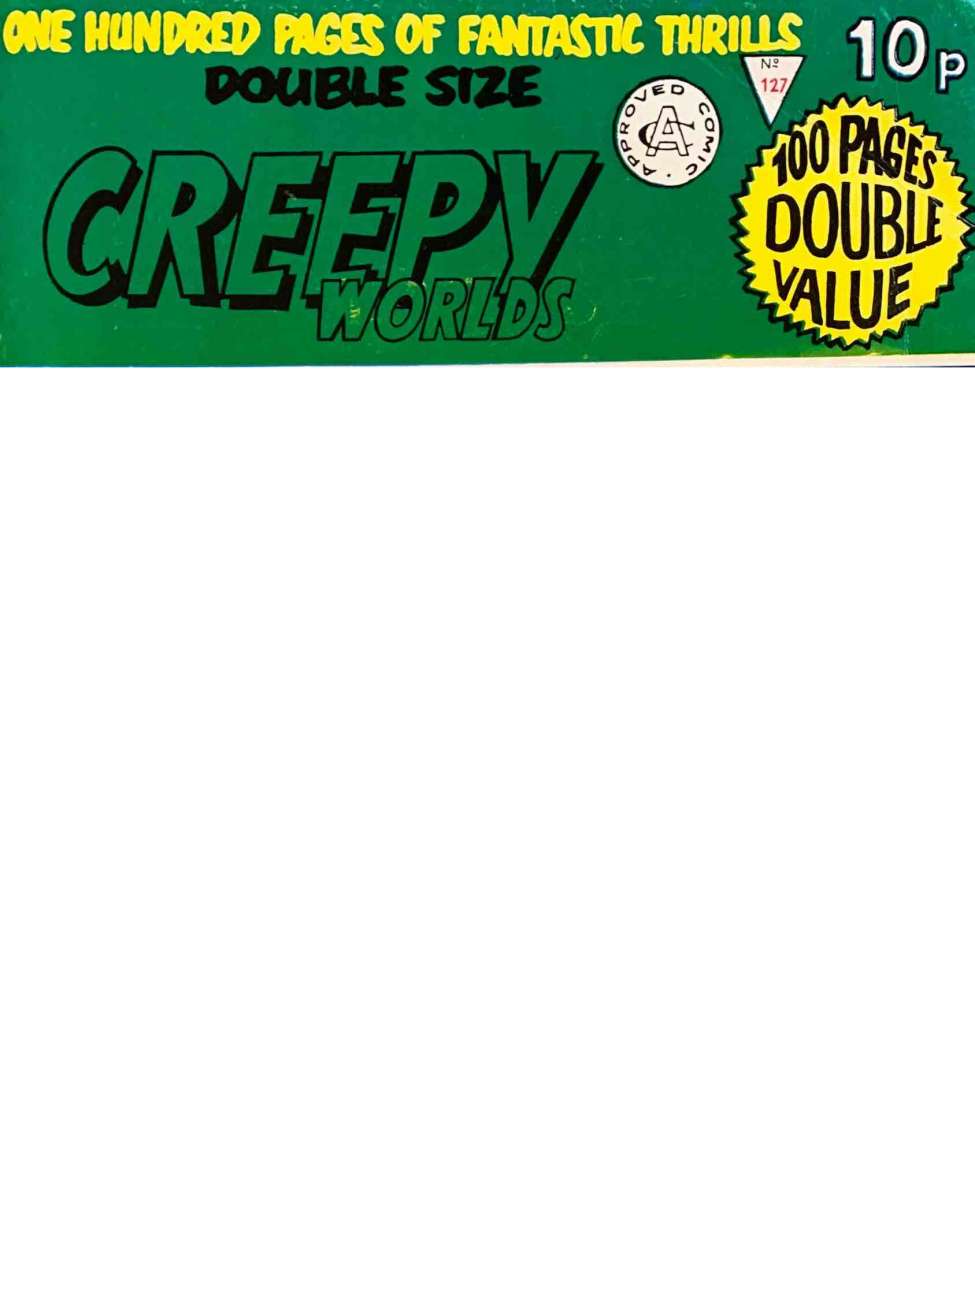 Book Cover For Creepy Worlds 127